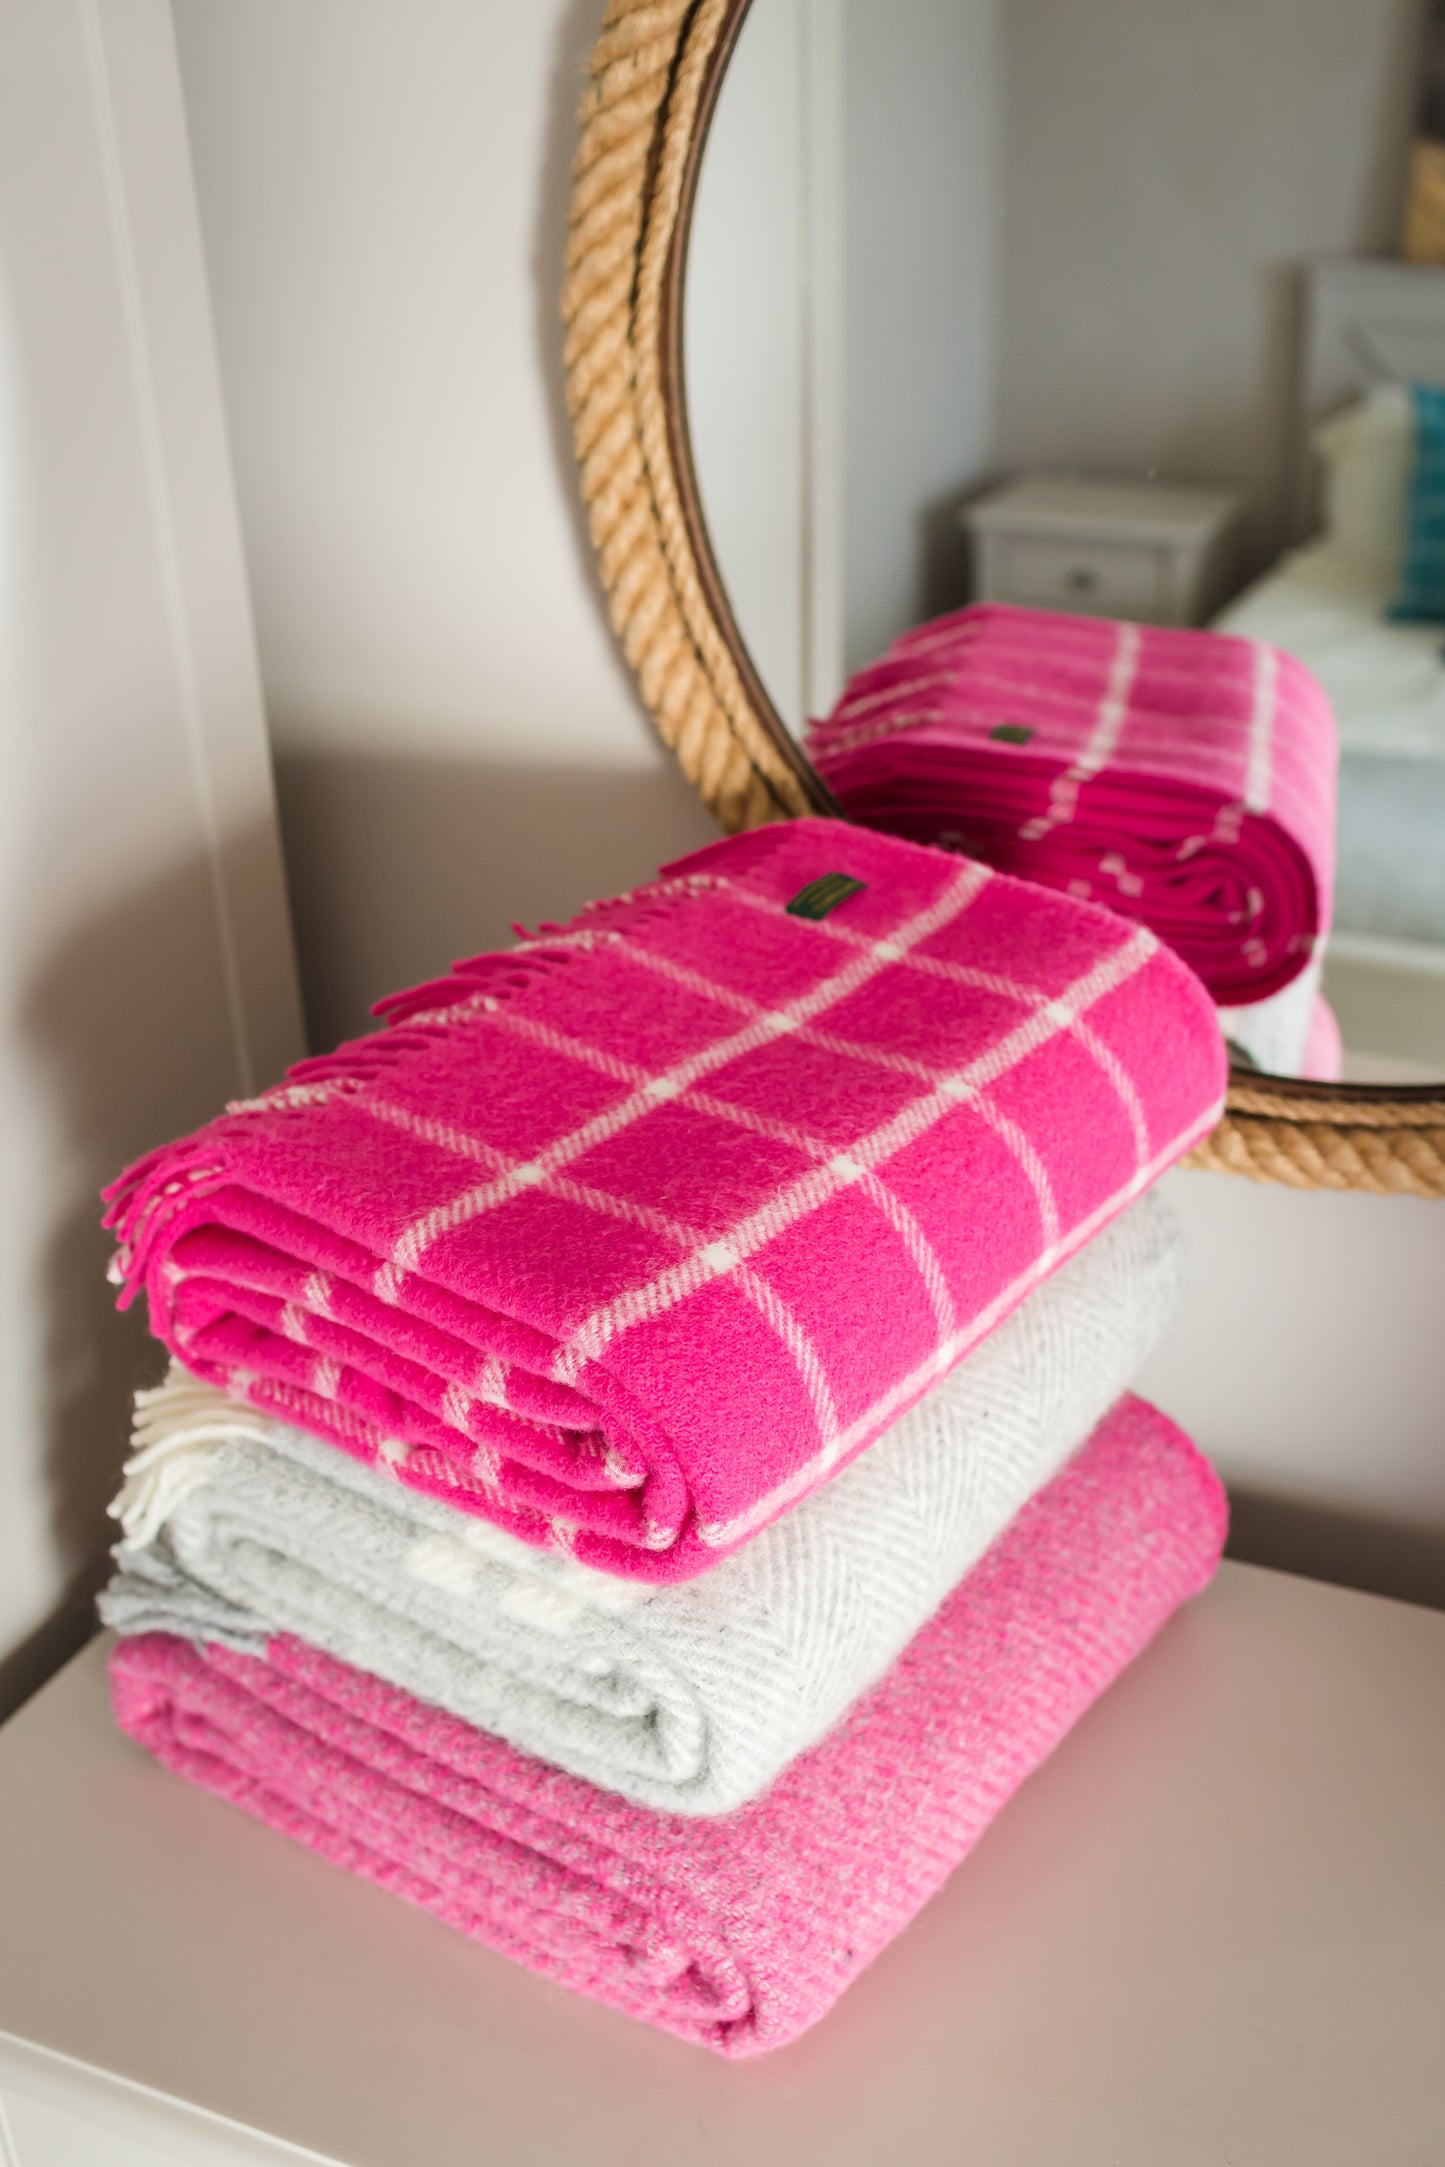 Pink Chequered Check Welsh Blanket by Tweedmill